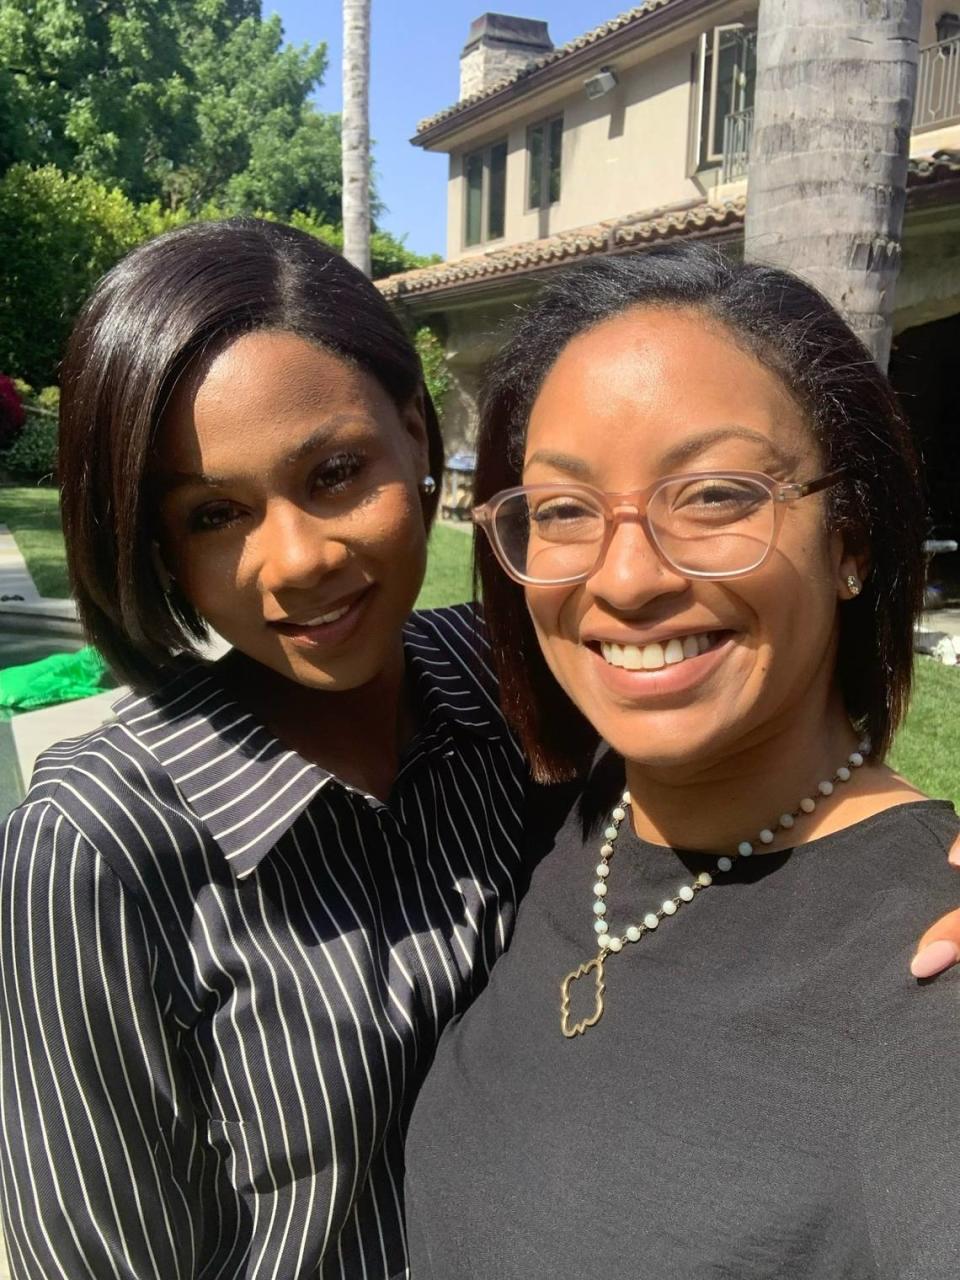 Natalia Temesgen, a Columbus State University associate professor of English, poses with actress Emayatzy Corinealdi on the set of the Hulu TV series “Reasonable Doubt” in May 2022 in Los Angeles. She is one of two executive story editors and among eight writers for the show.